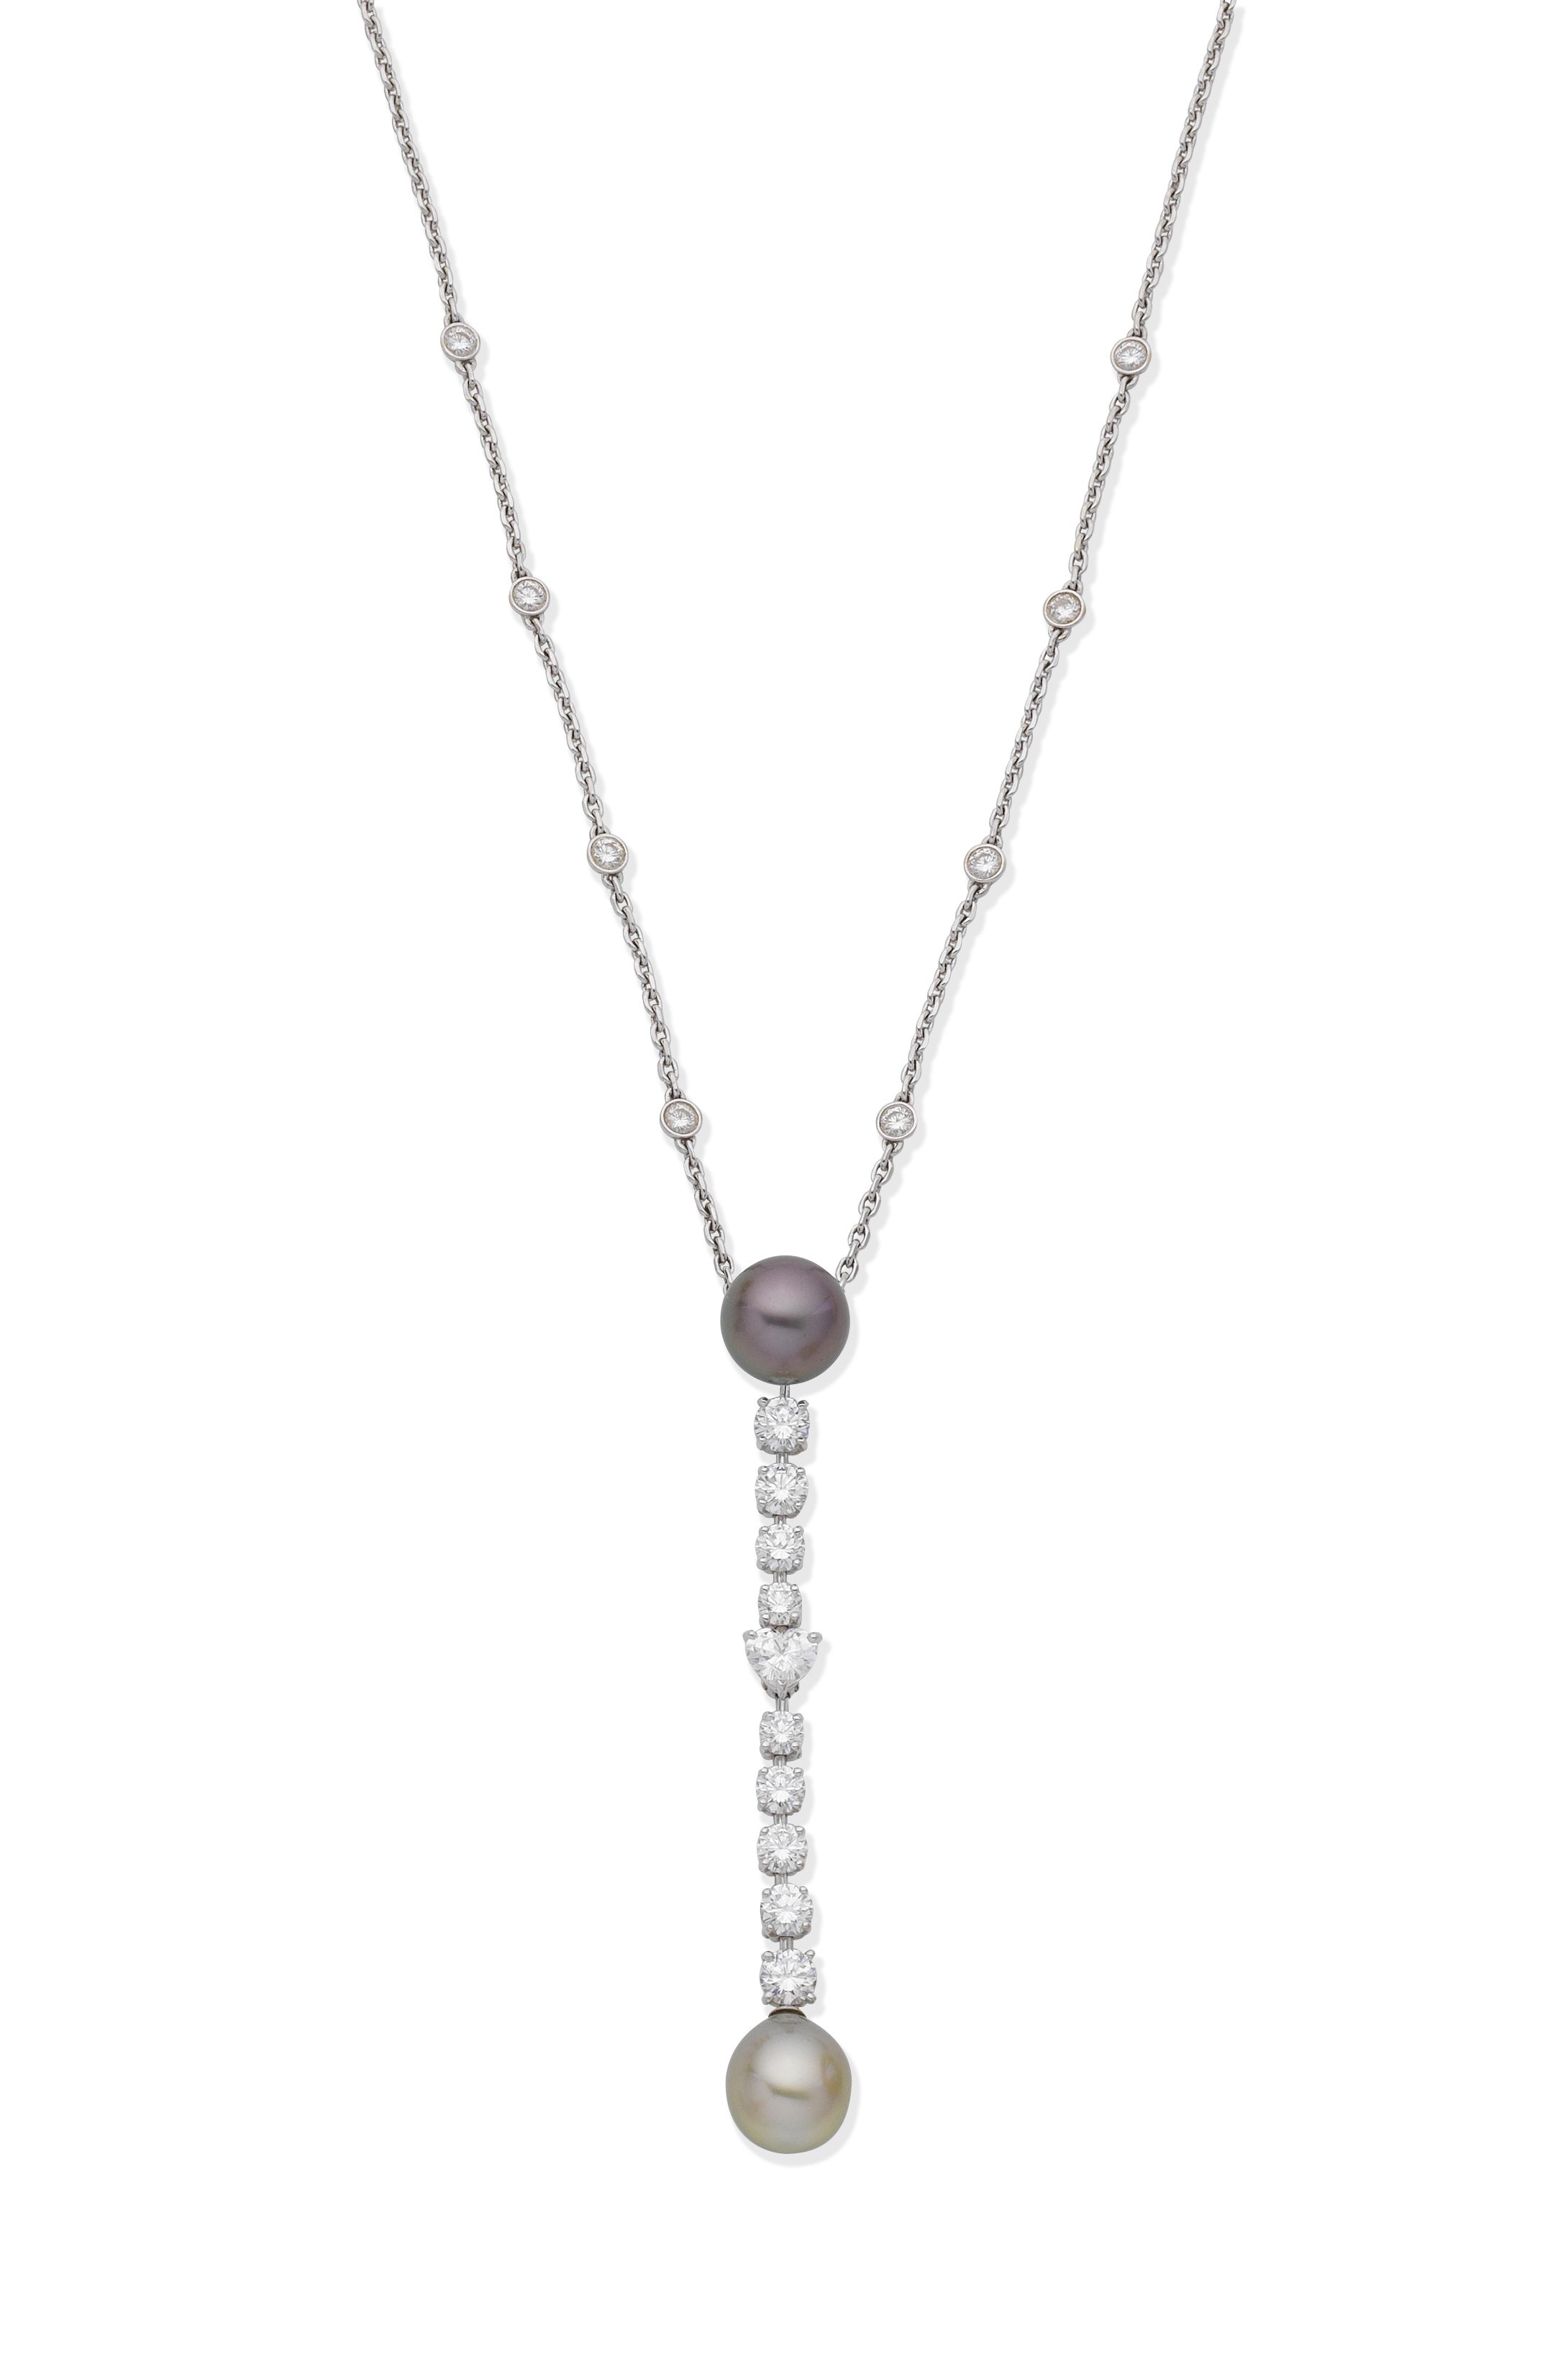 CARTIER: CULTURED PEARL AND DIAMOND PENDANT NECKLACE